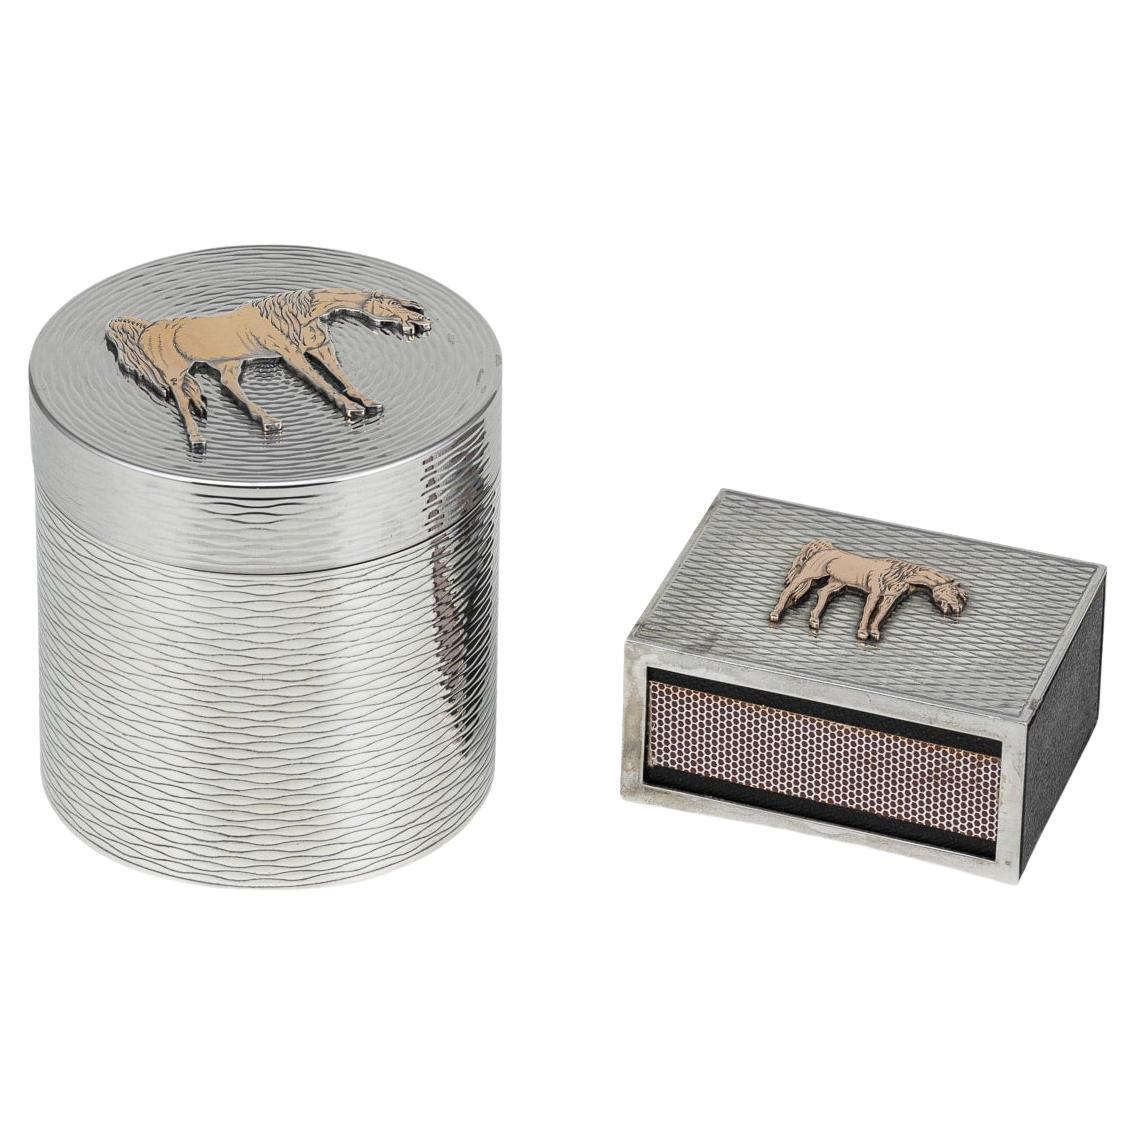 Hermes Solid Silver Cigarette Box & Matchbox With Gold Horse Detail c.1960